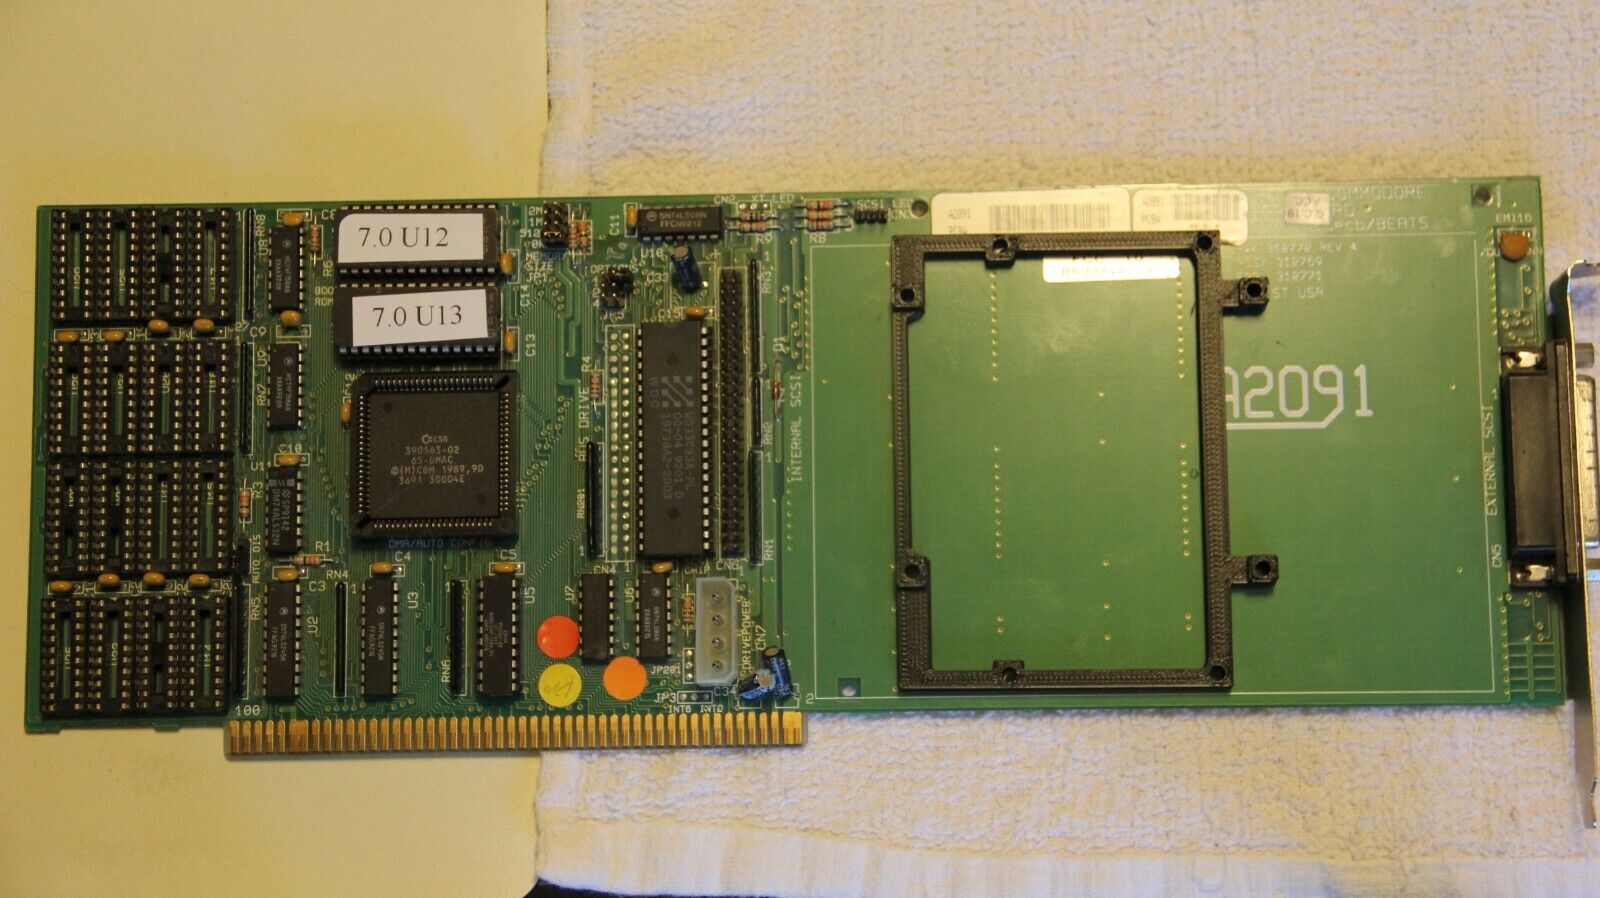 SCSI2SD Mount for chassis, hard cards Amiga A2091,Macintosh etc